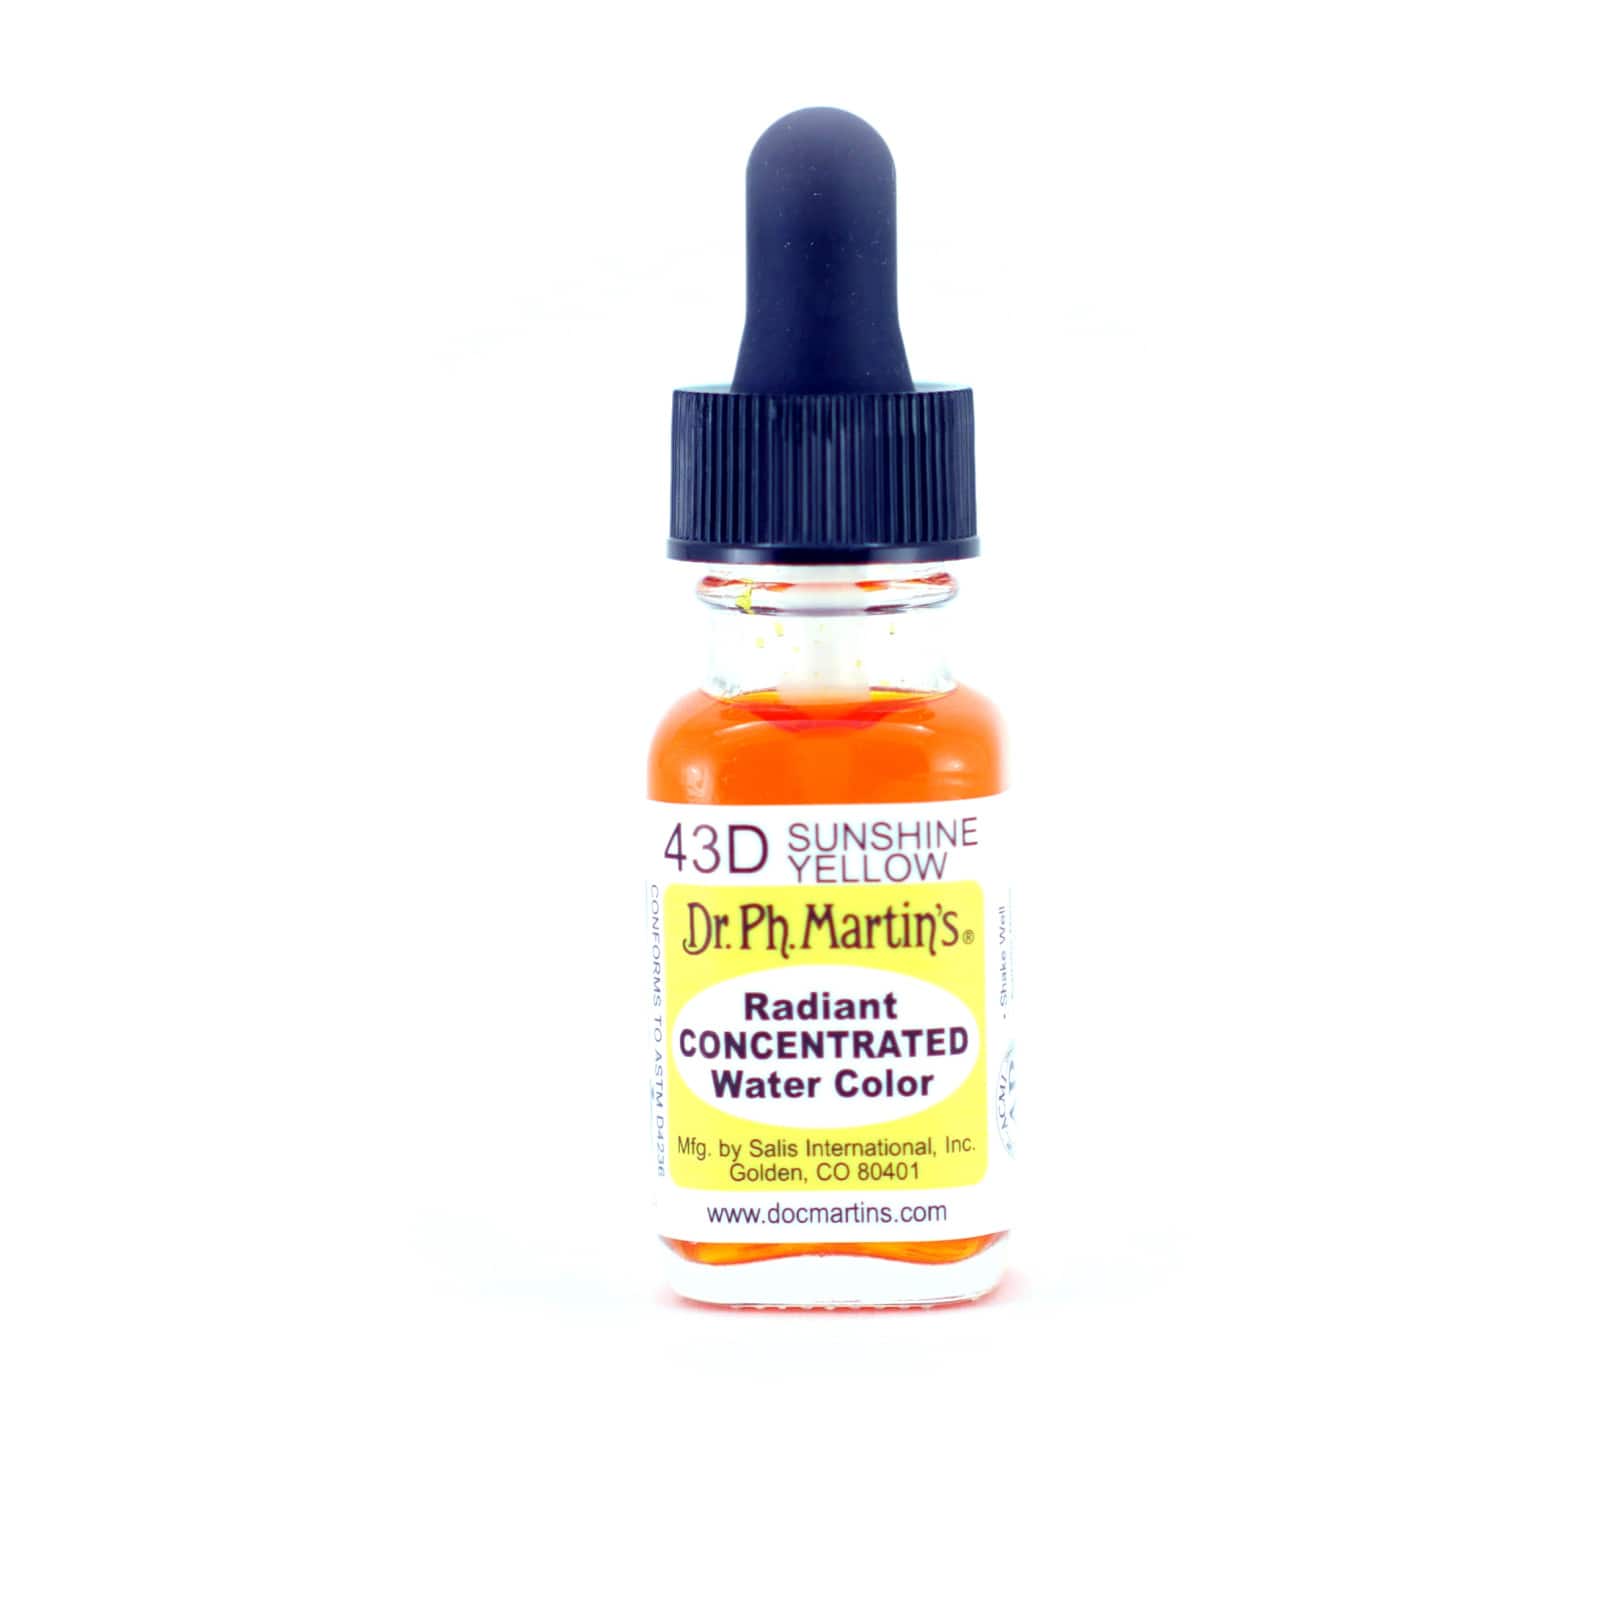 Dr. Ph. Martin's® Radiant Concentrated Watercolor, 0.5oz. | Michaels